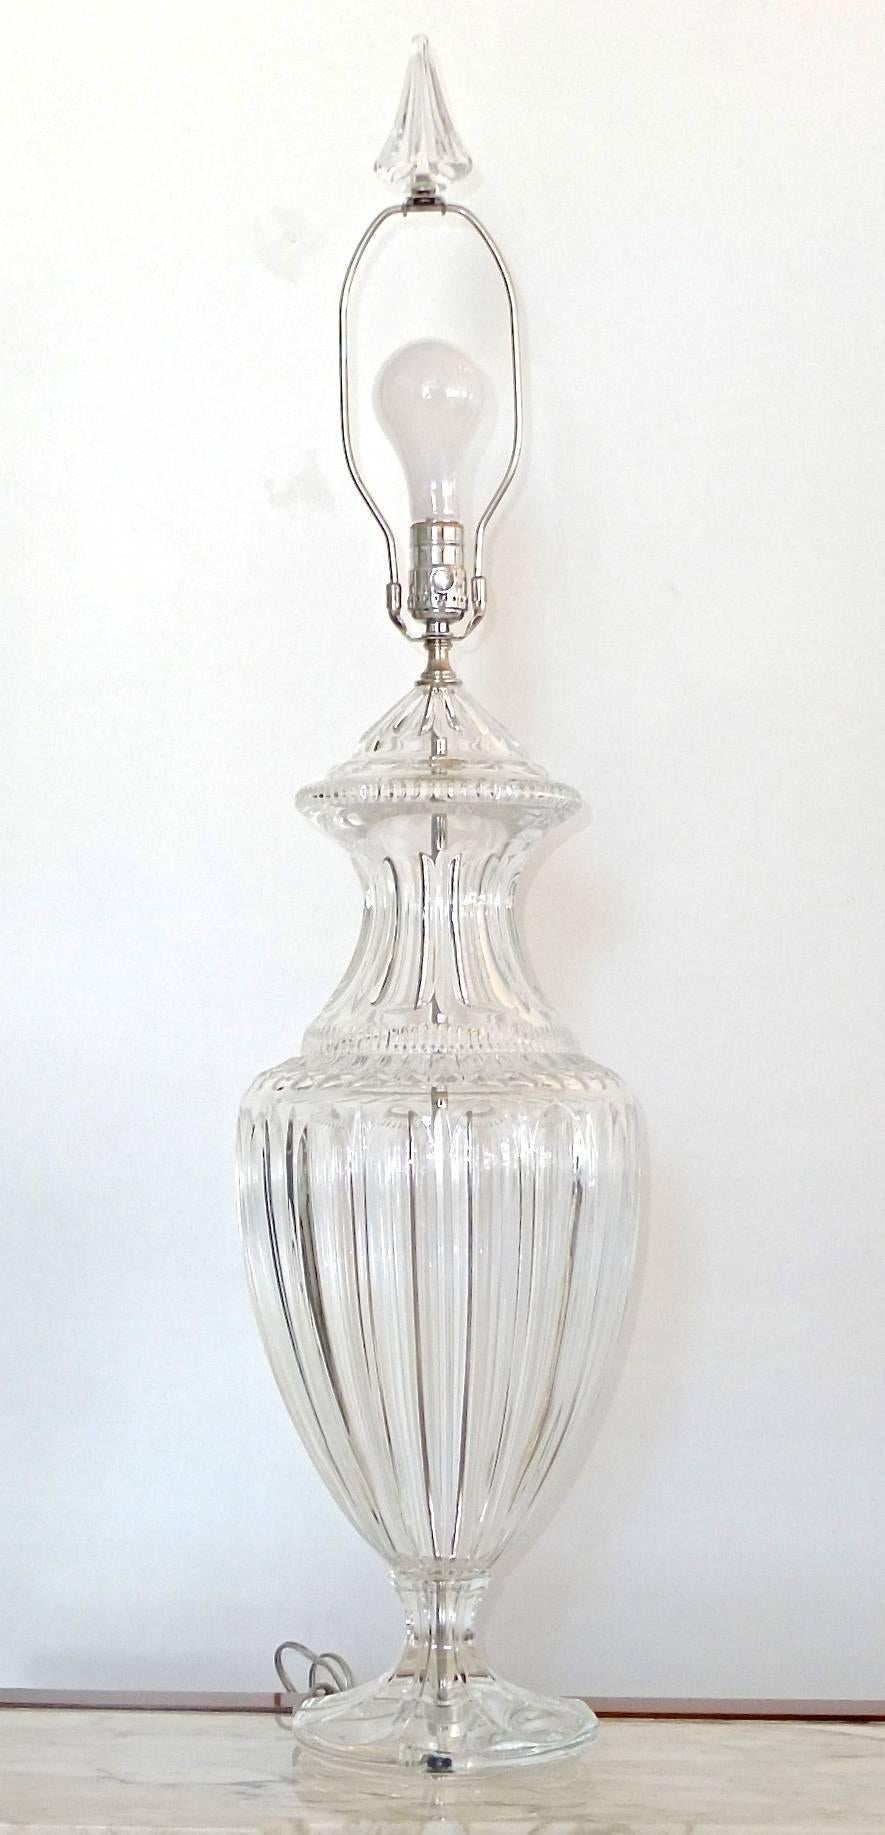 Pair of excellent lead cut crystal urn form lamps with crystal bases and polished nickel hardware and matching crystal finials. Probably Baccarat.

Measure: 24 inches high to the nack of the socket.